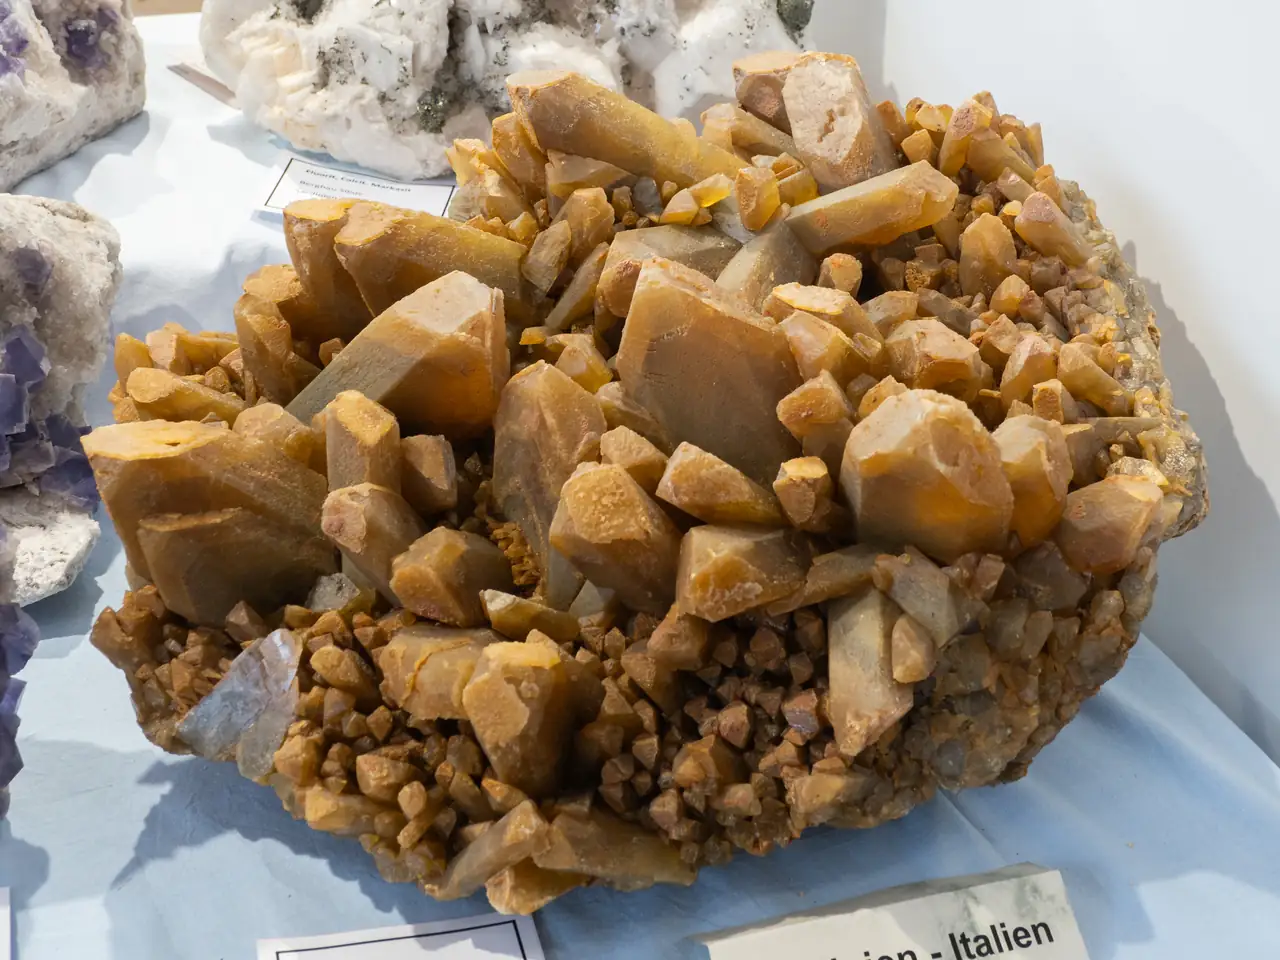 Huge cluster of yellow-green baryte crystals from Sardinia, Italy